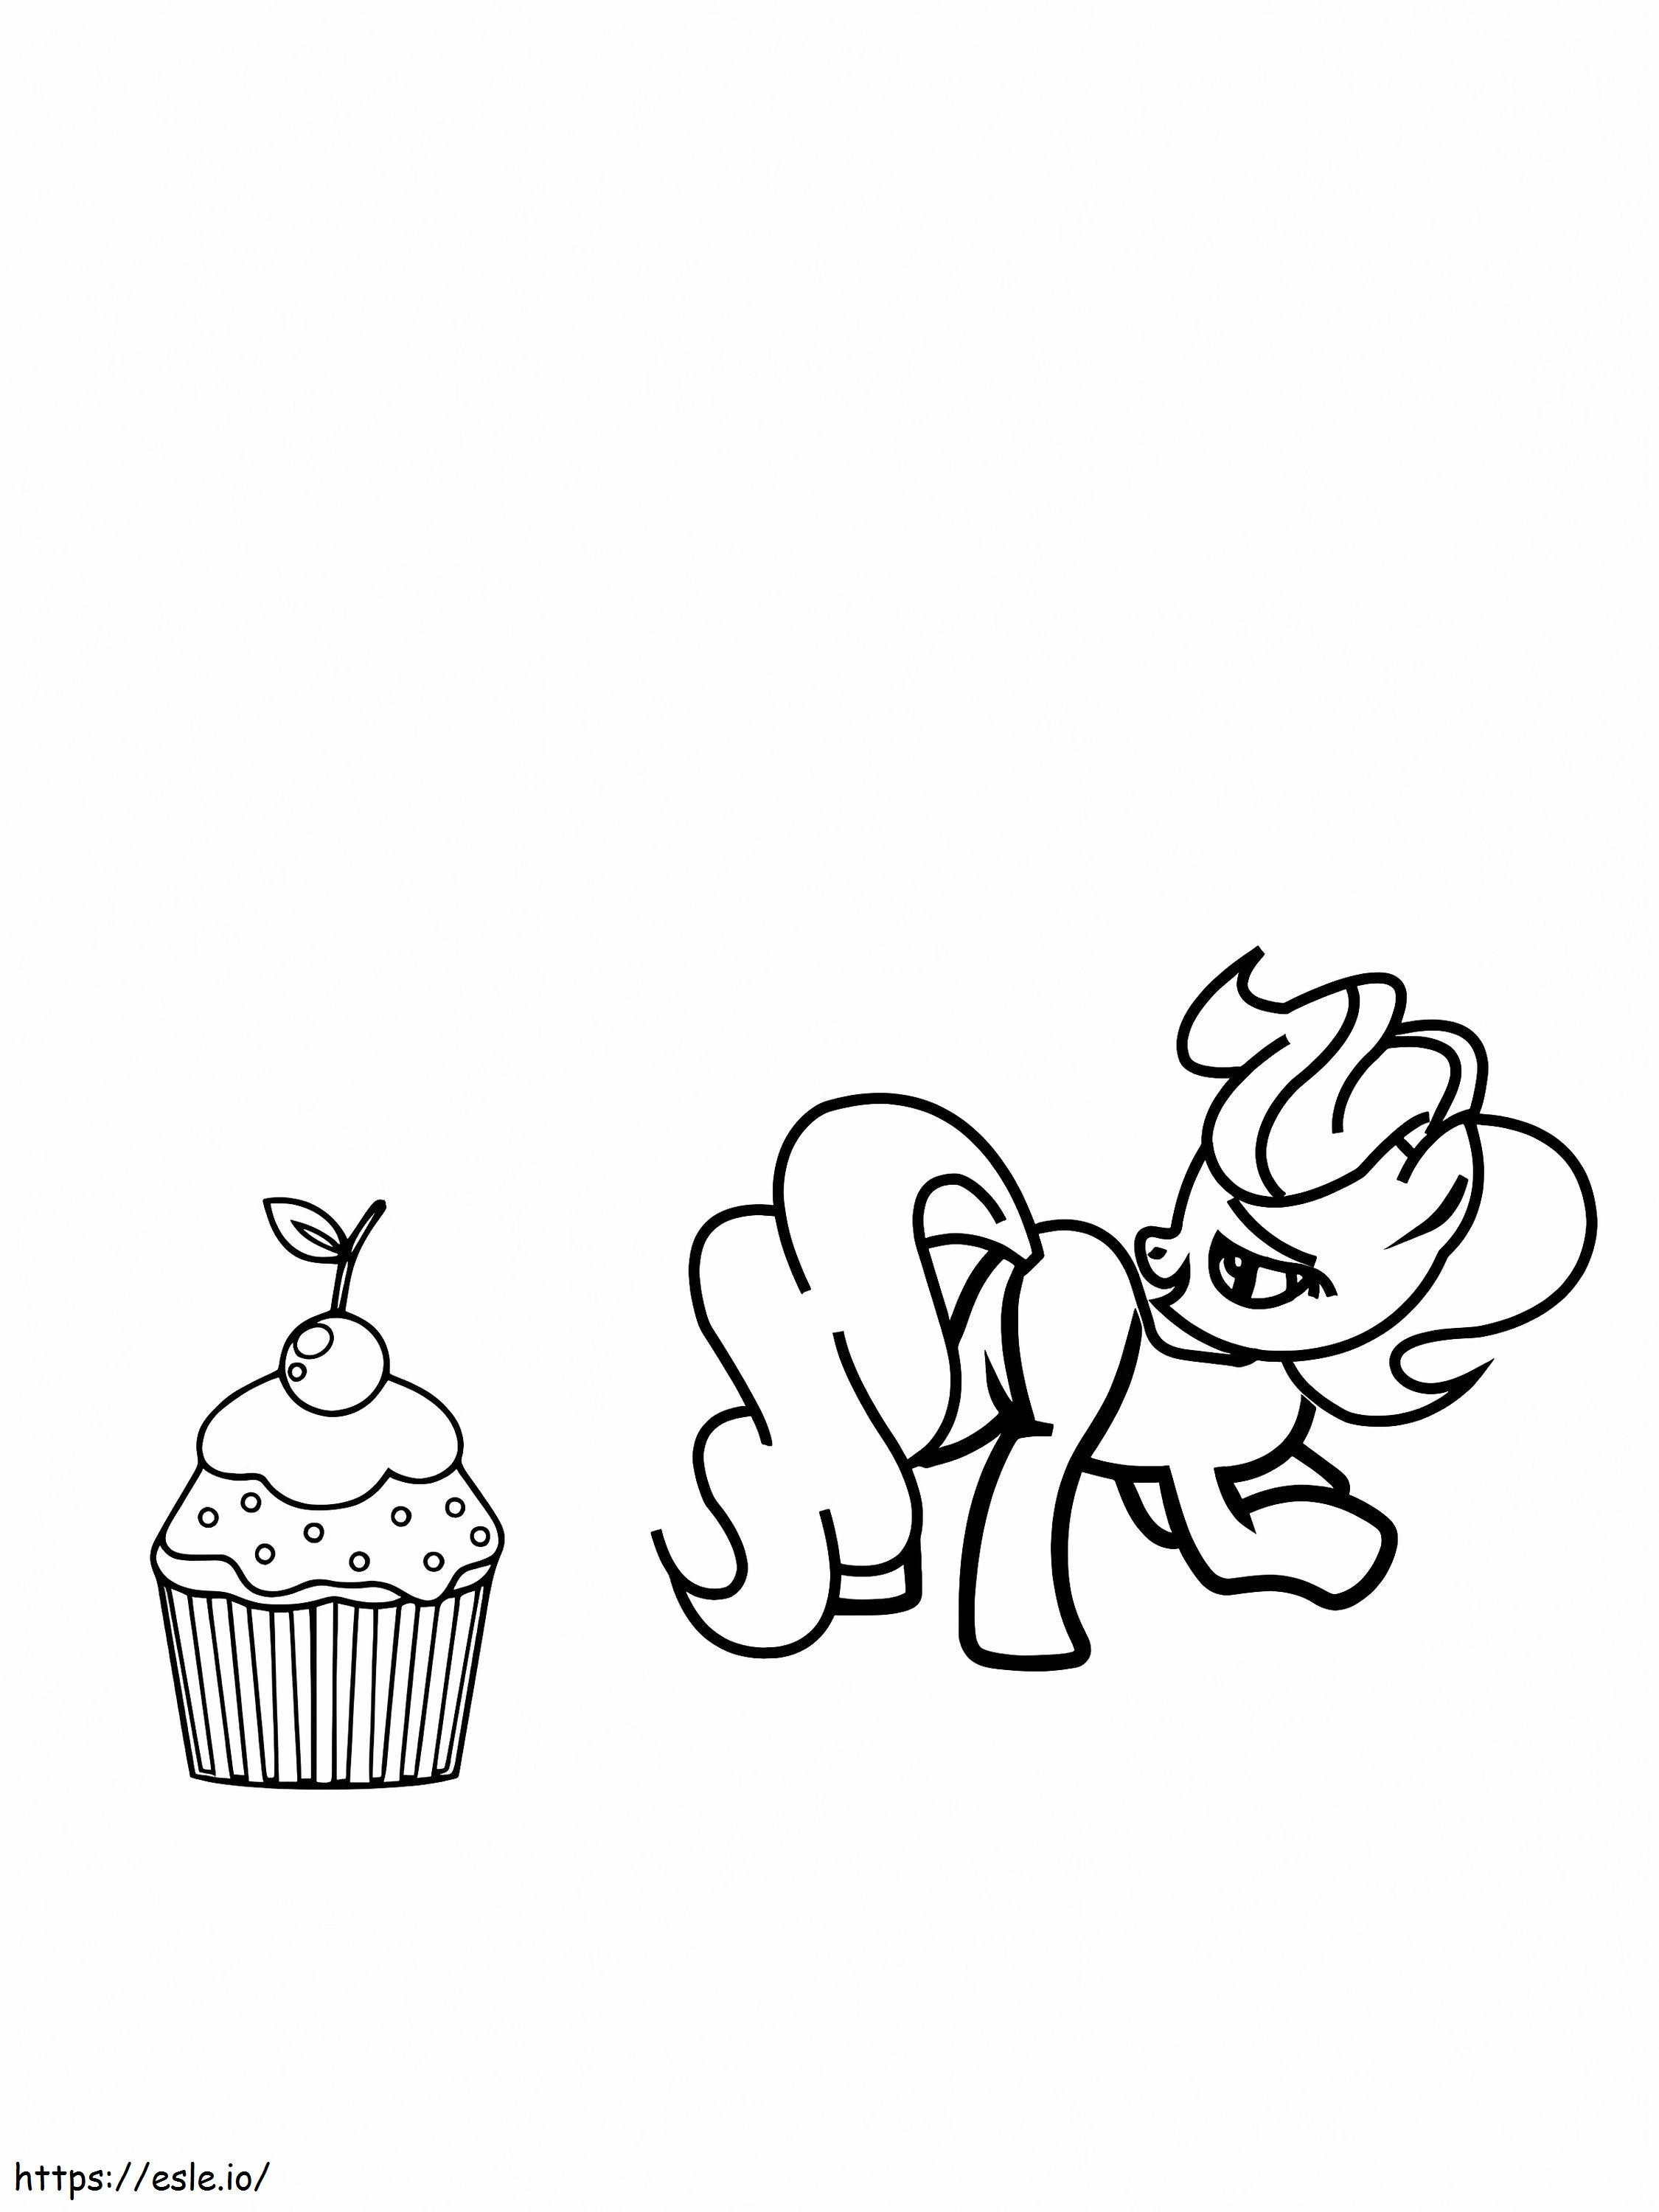 Cupcake And Mrs Cake From My Little Pony coloring page